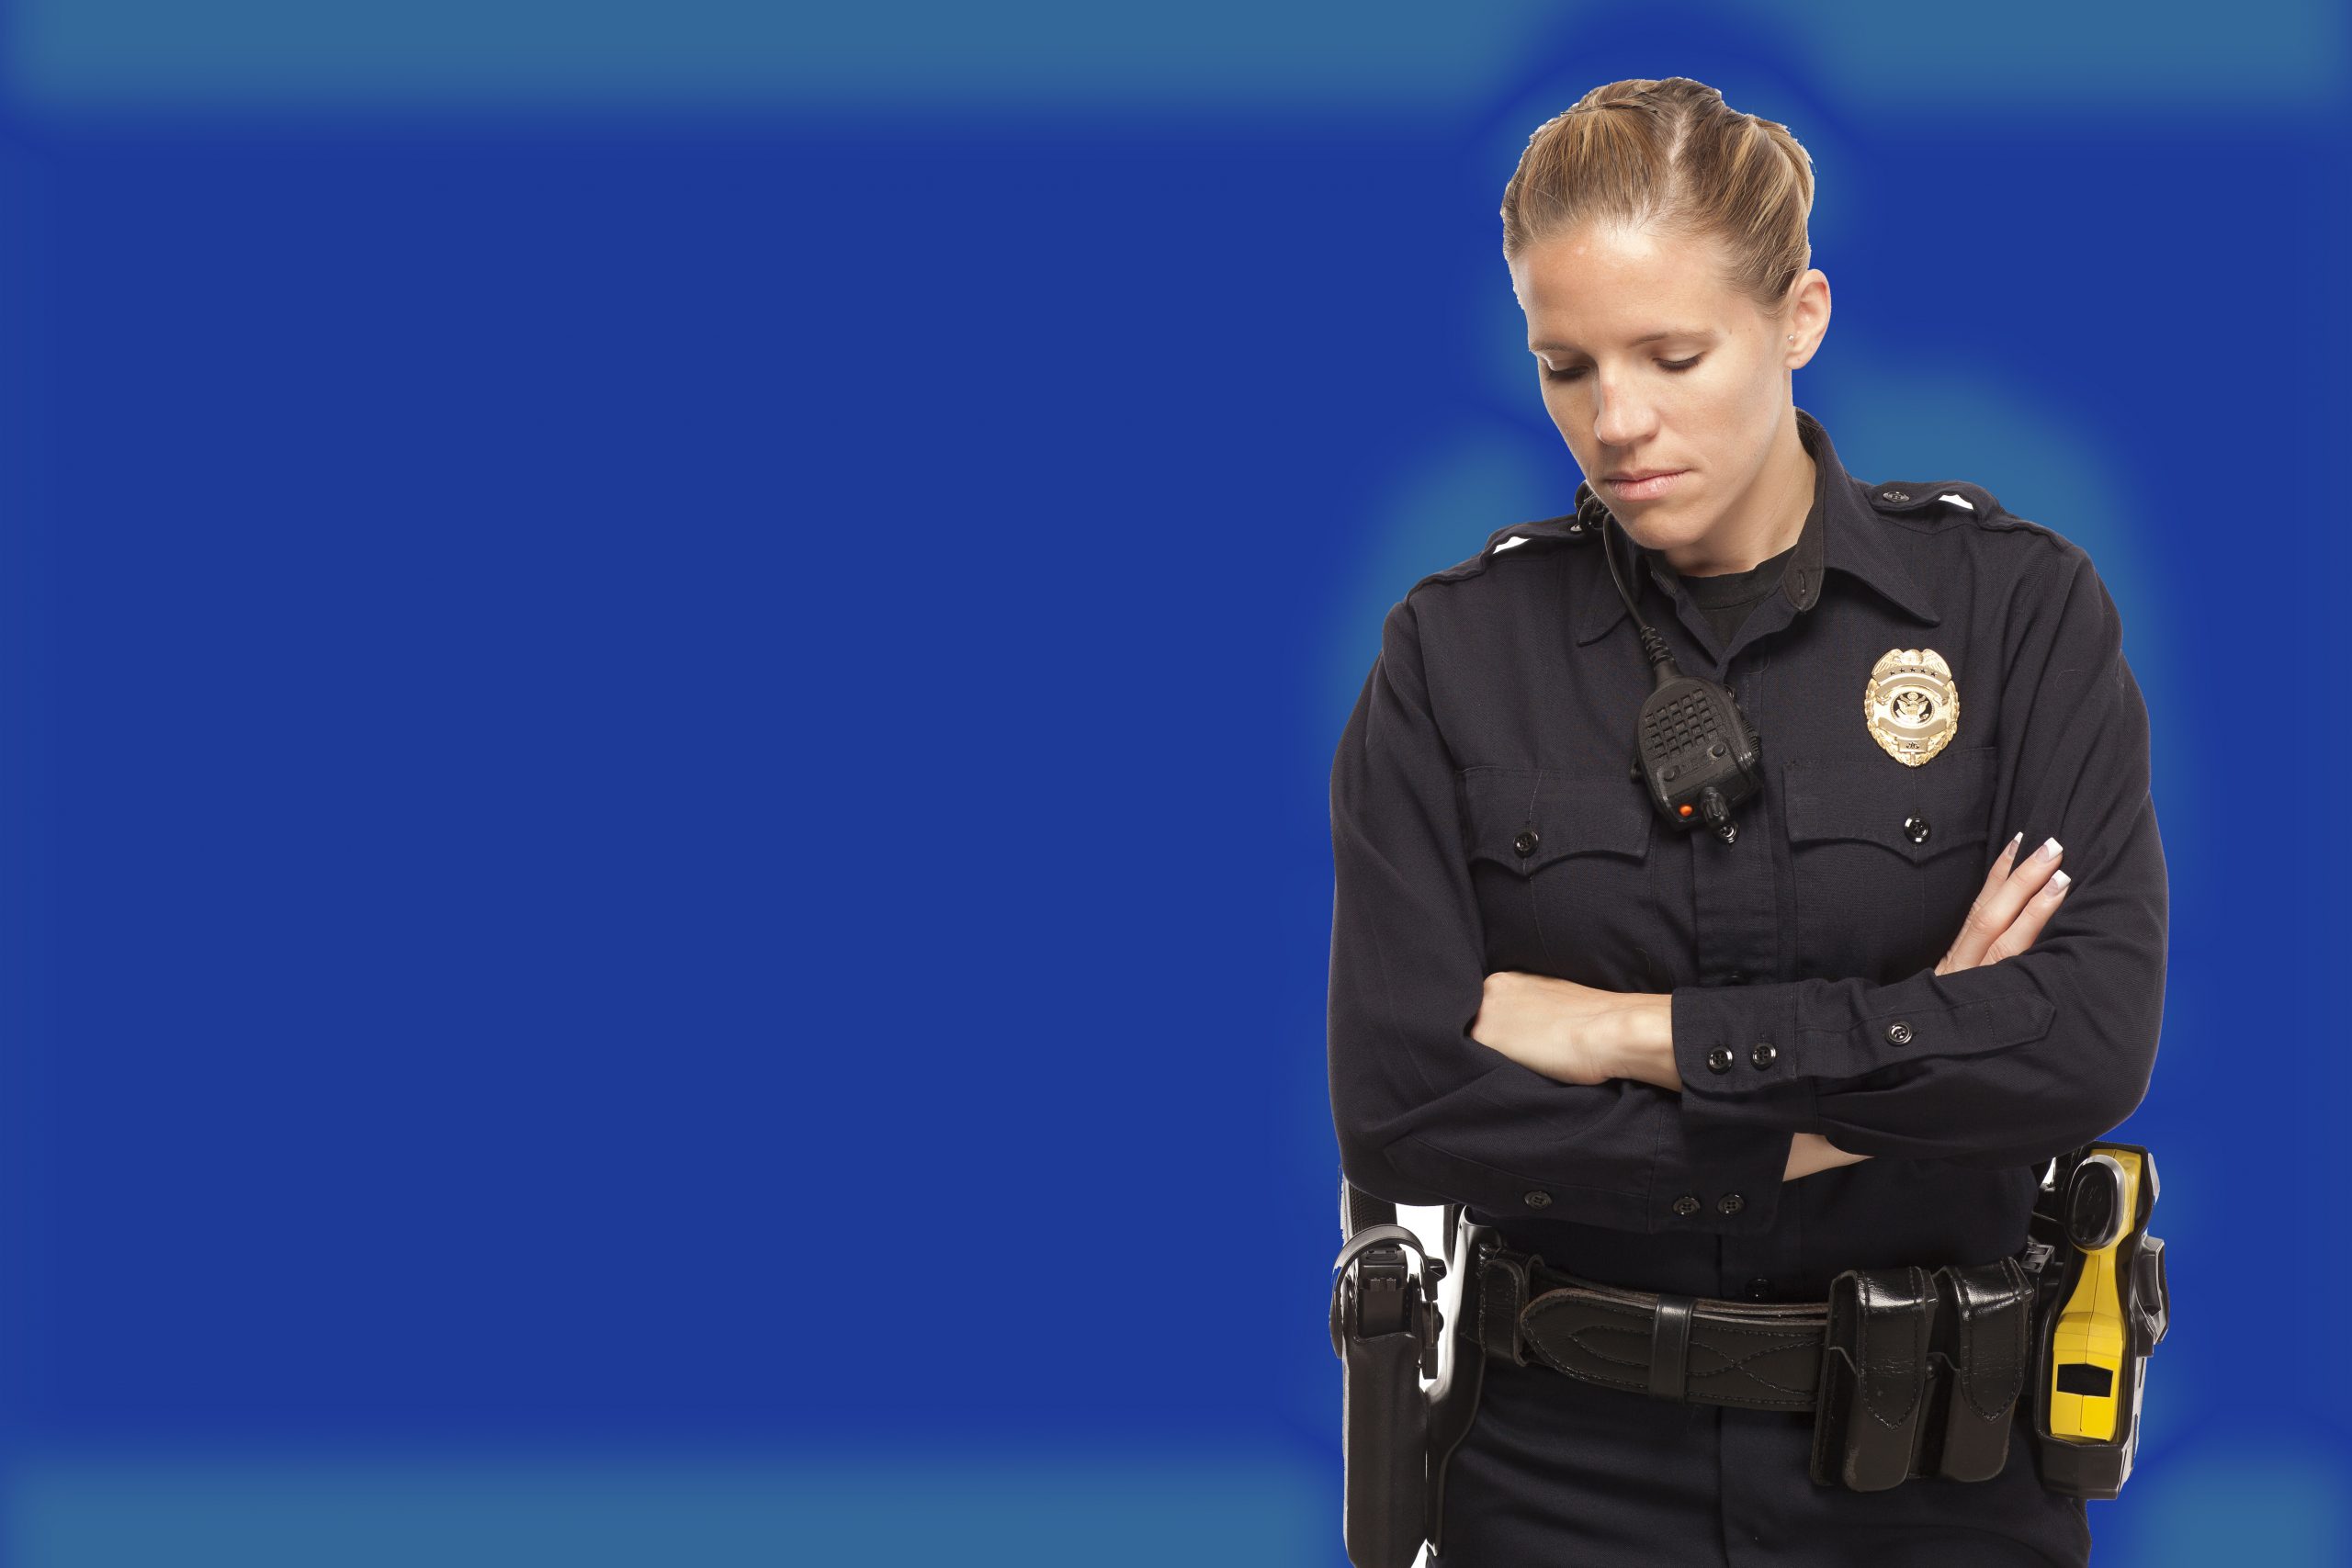 15 Ways Investigators Can Help Traumatized Officers